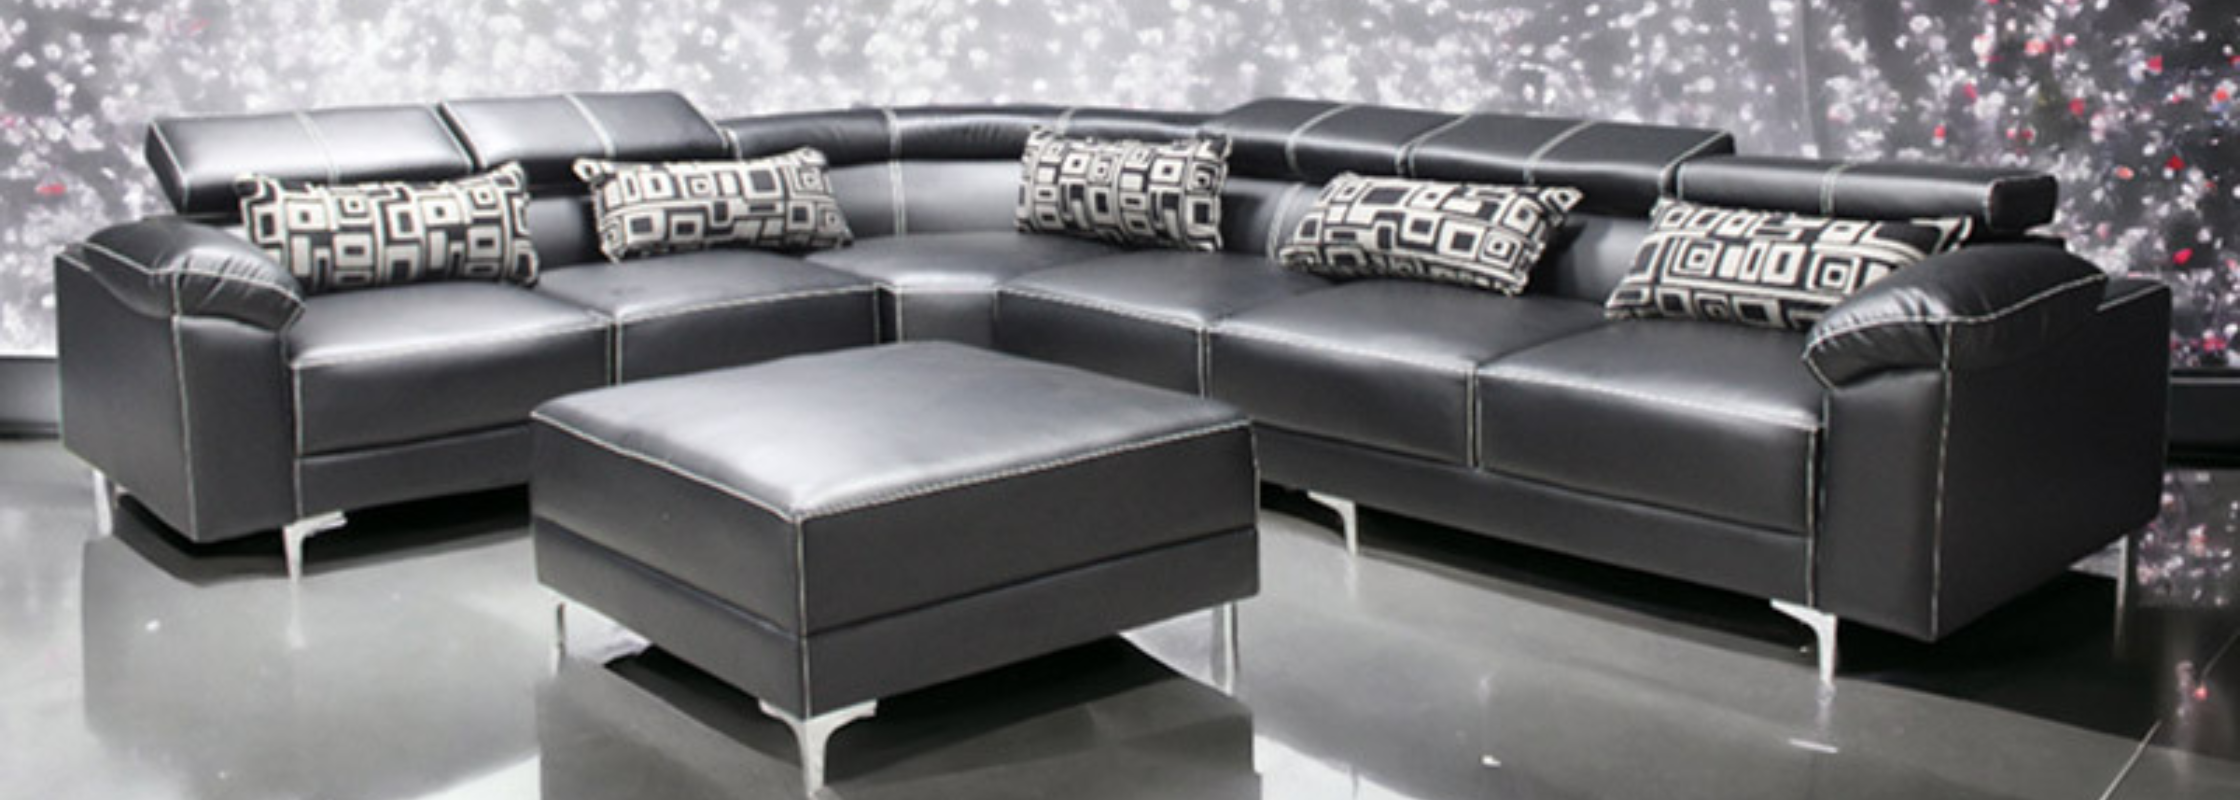 Aggie Lounge Suite